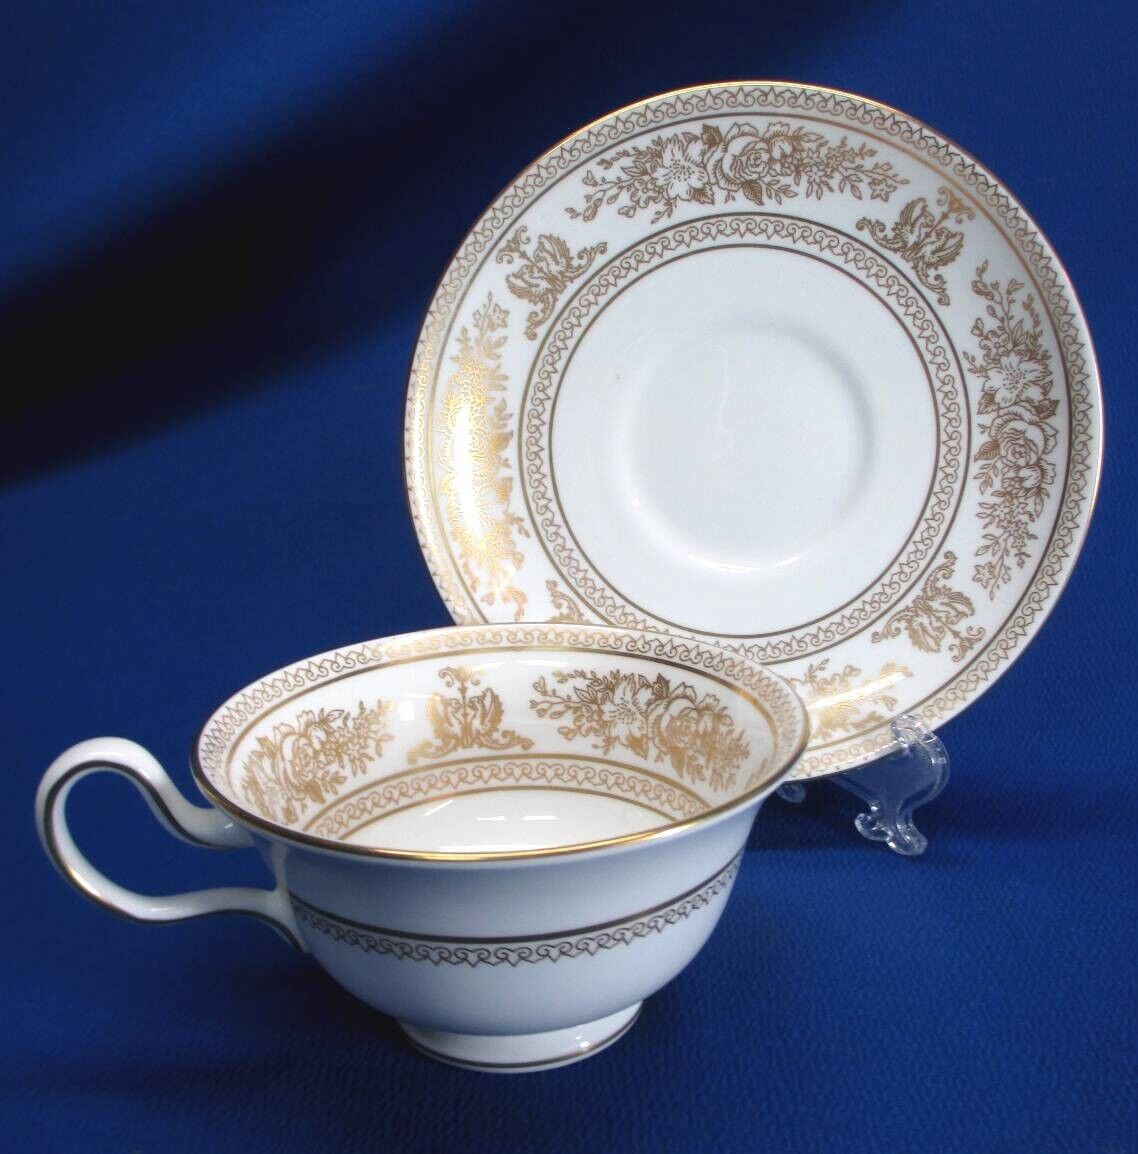 WEDGWOOD GOLD COLUMBIA PATTERN CUP & SAUCER SET